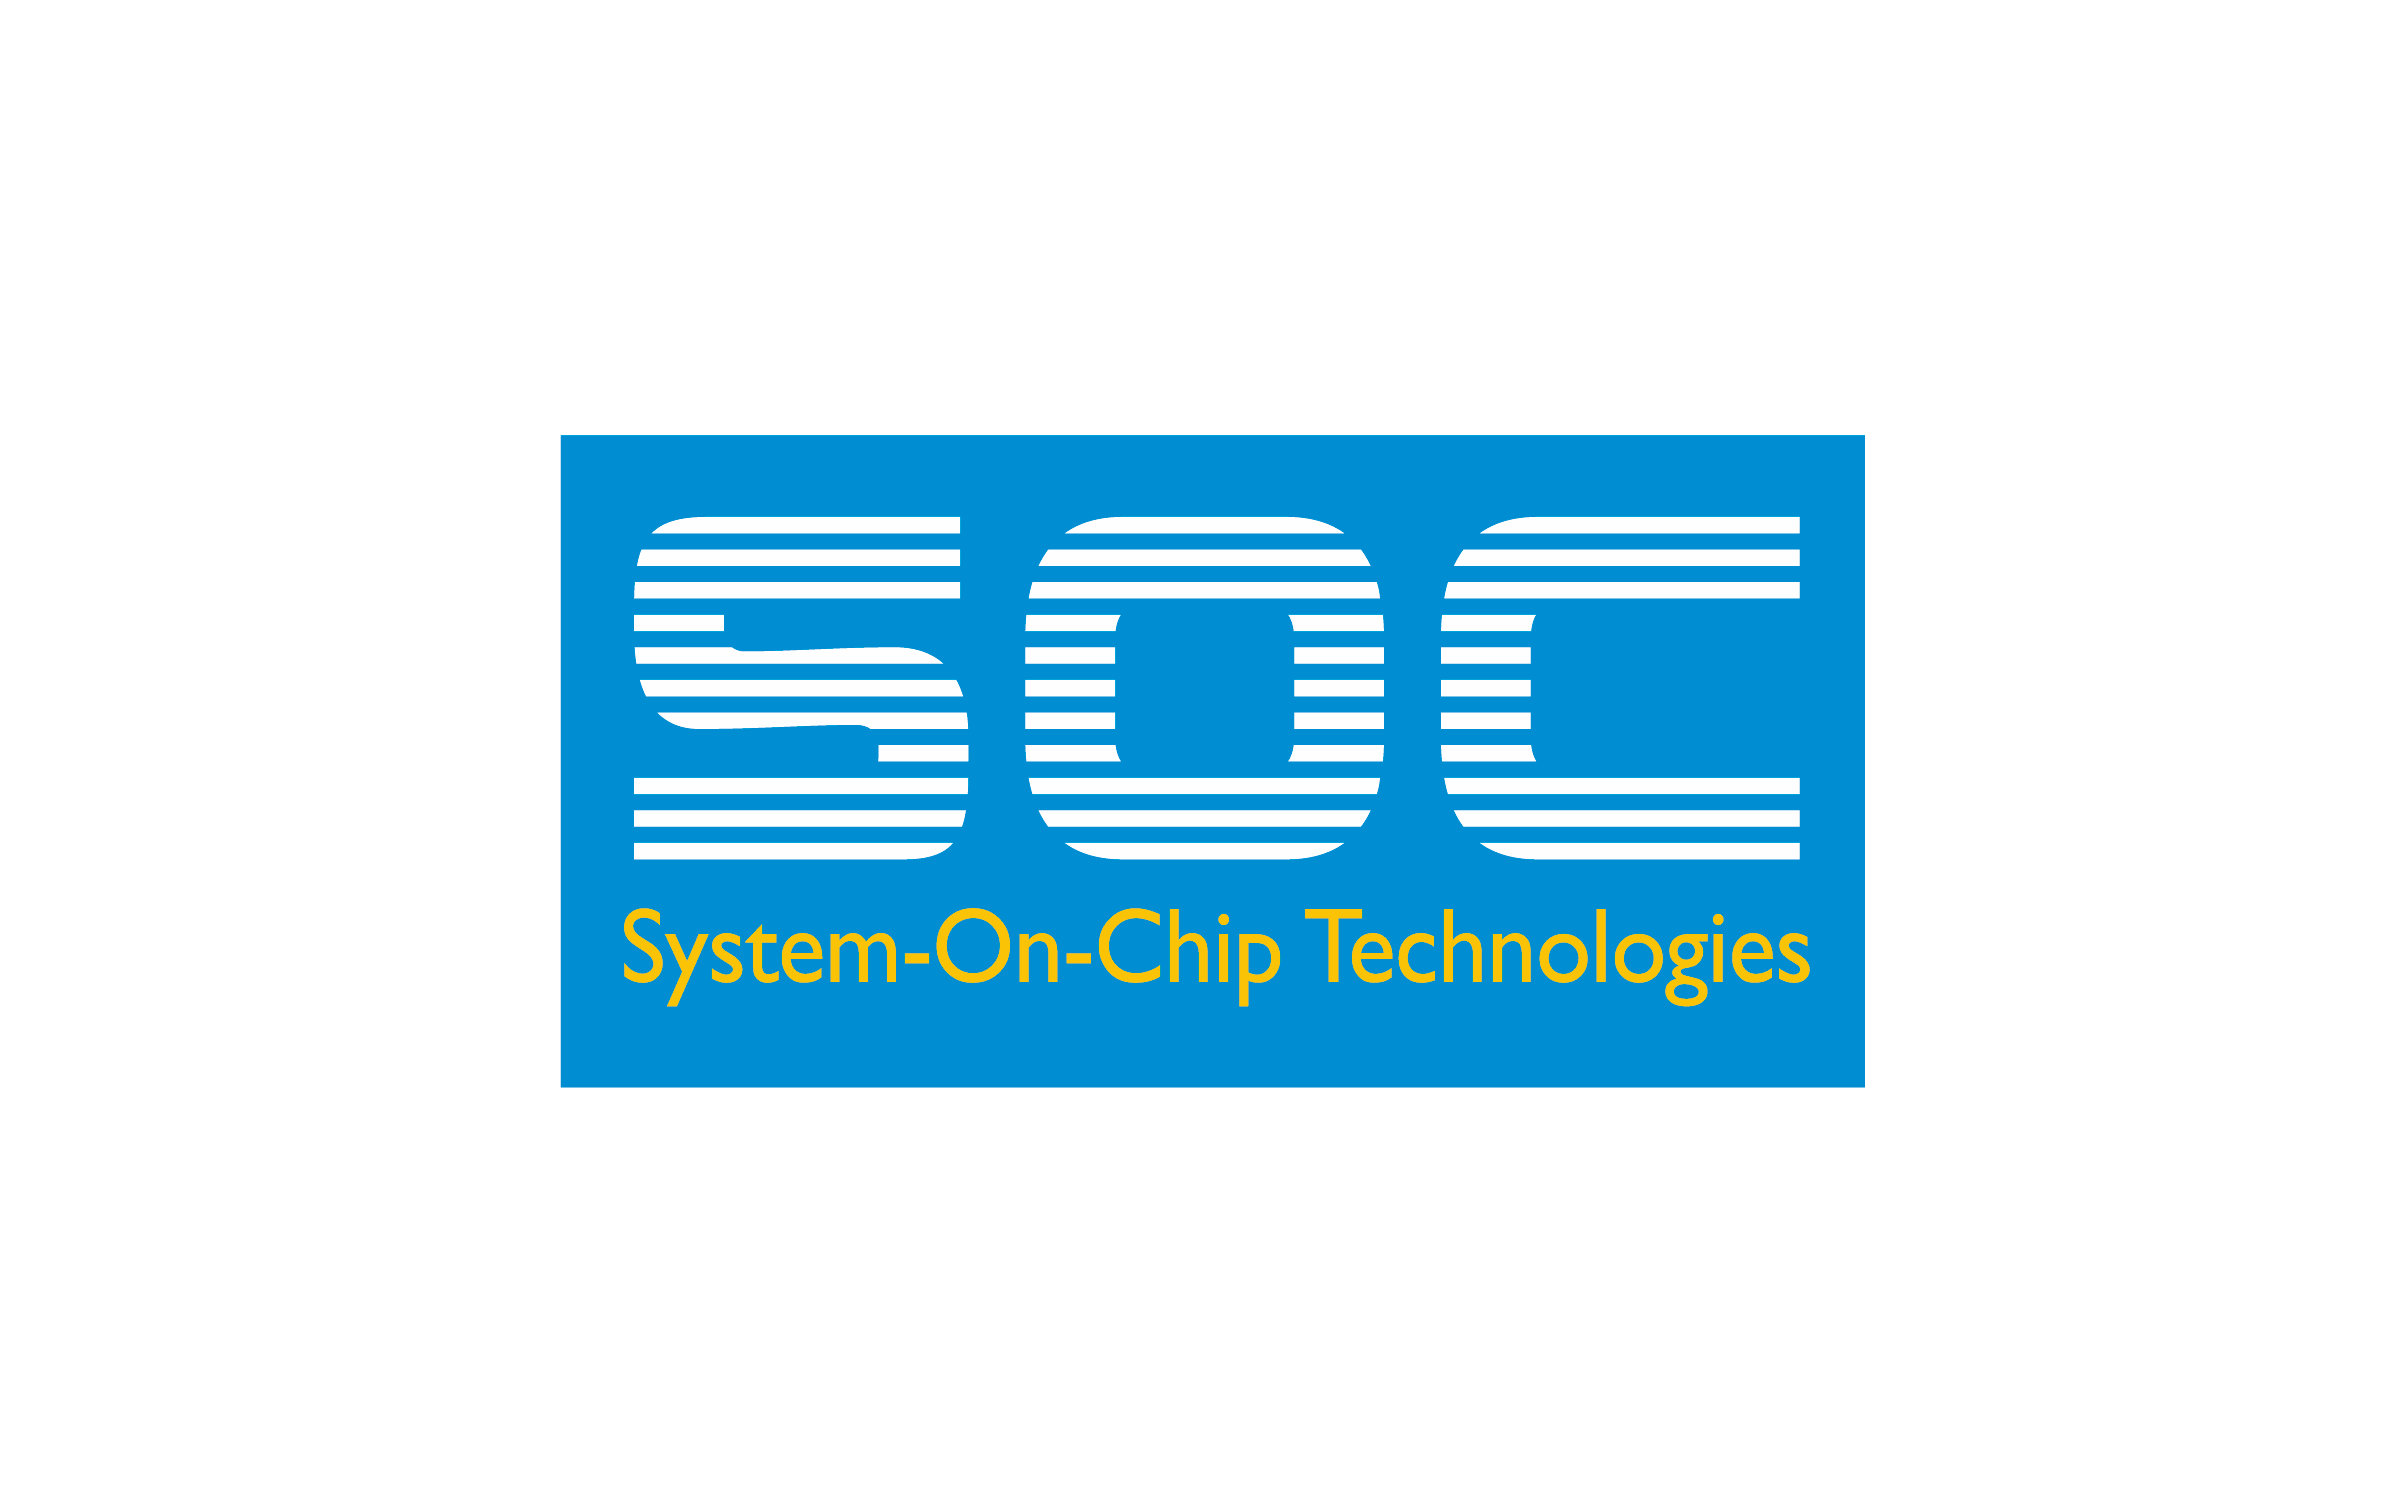 System-On-Chip